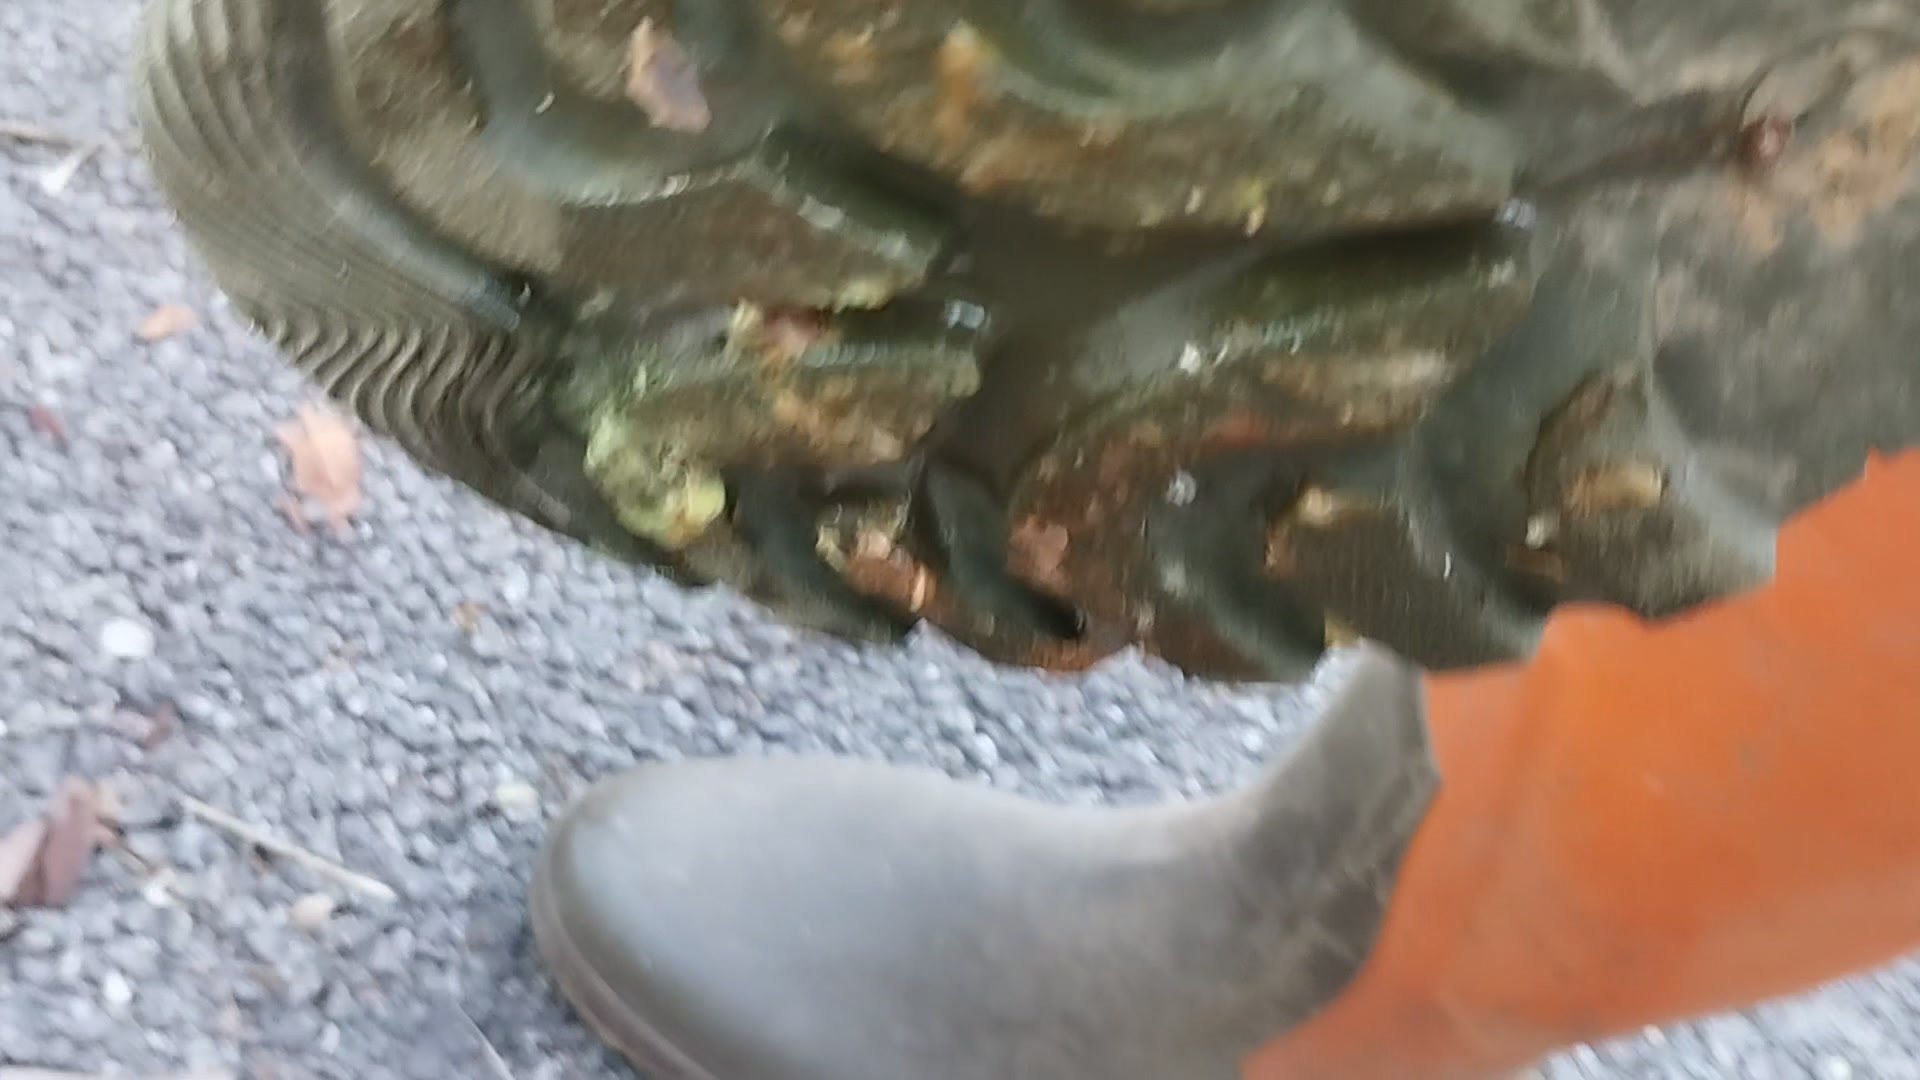 Aigle rubber boots crushing snail